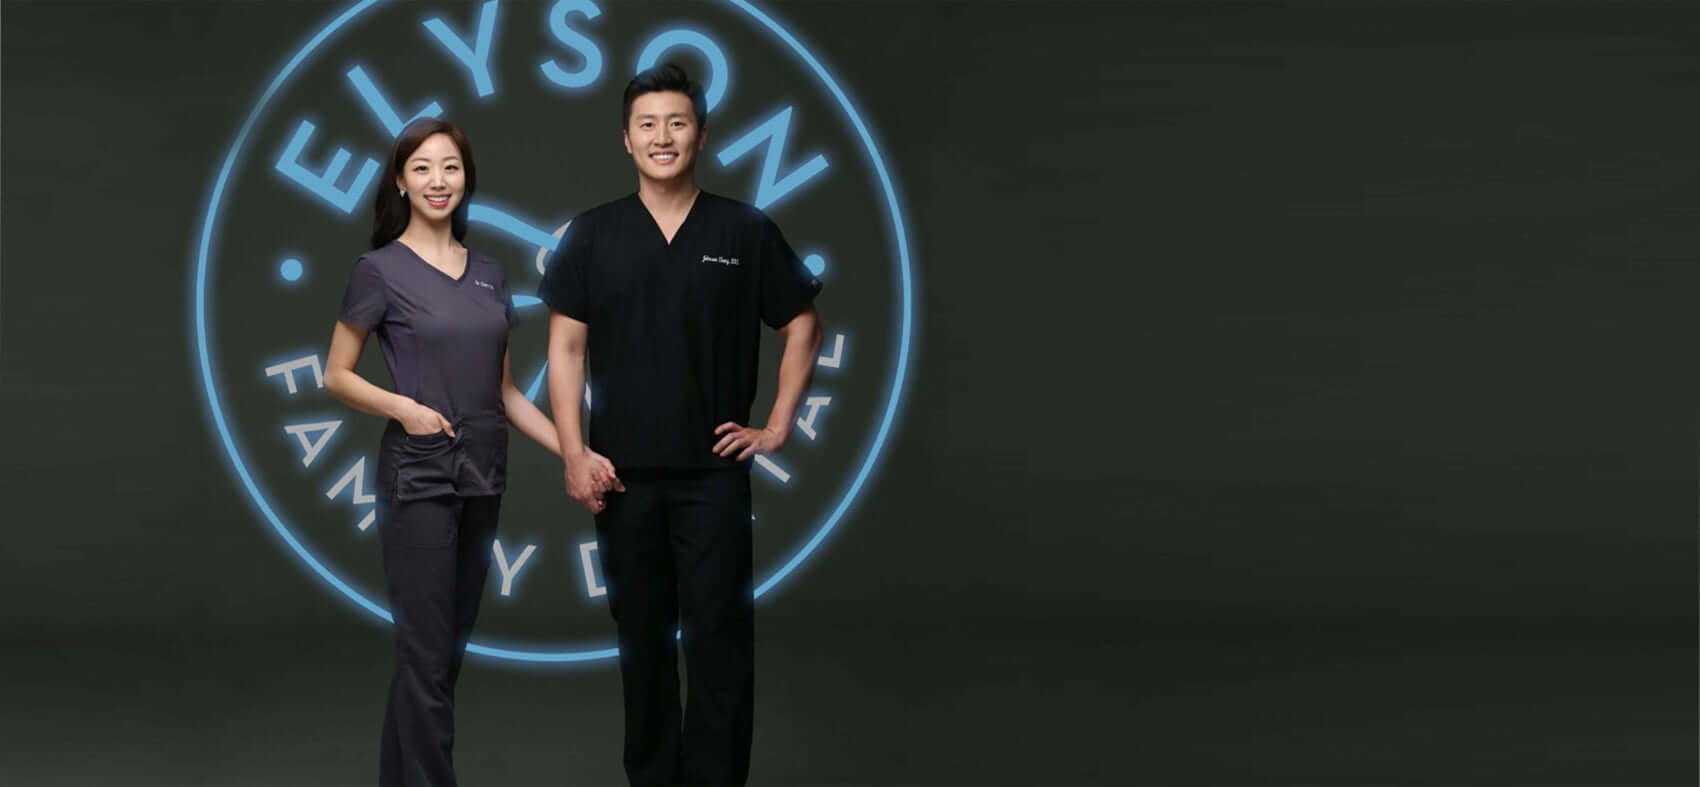 Dr. Yoo & Dr. Ching in front of logo